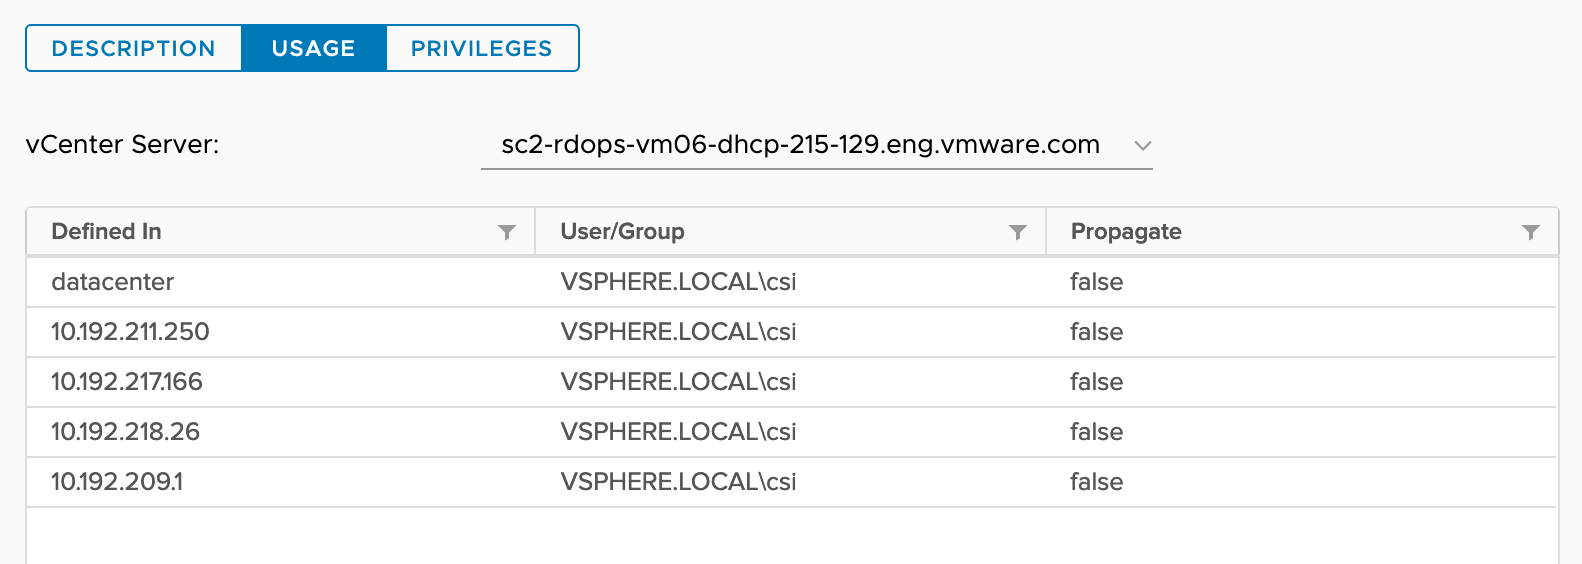 The screenshot shows the ReadOnly role assignment for vSphere objects.